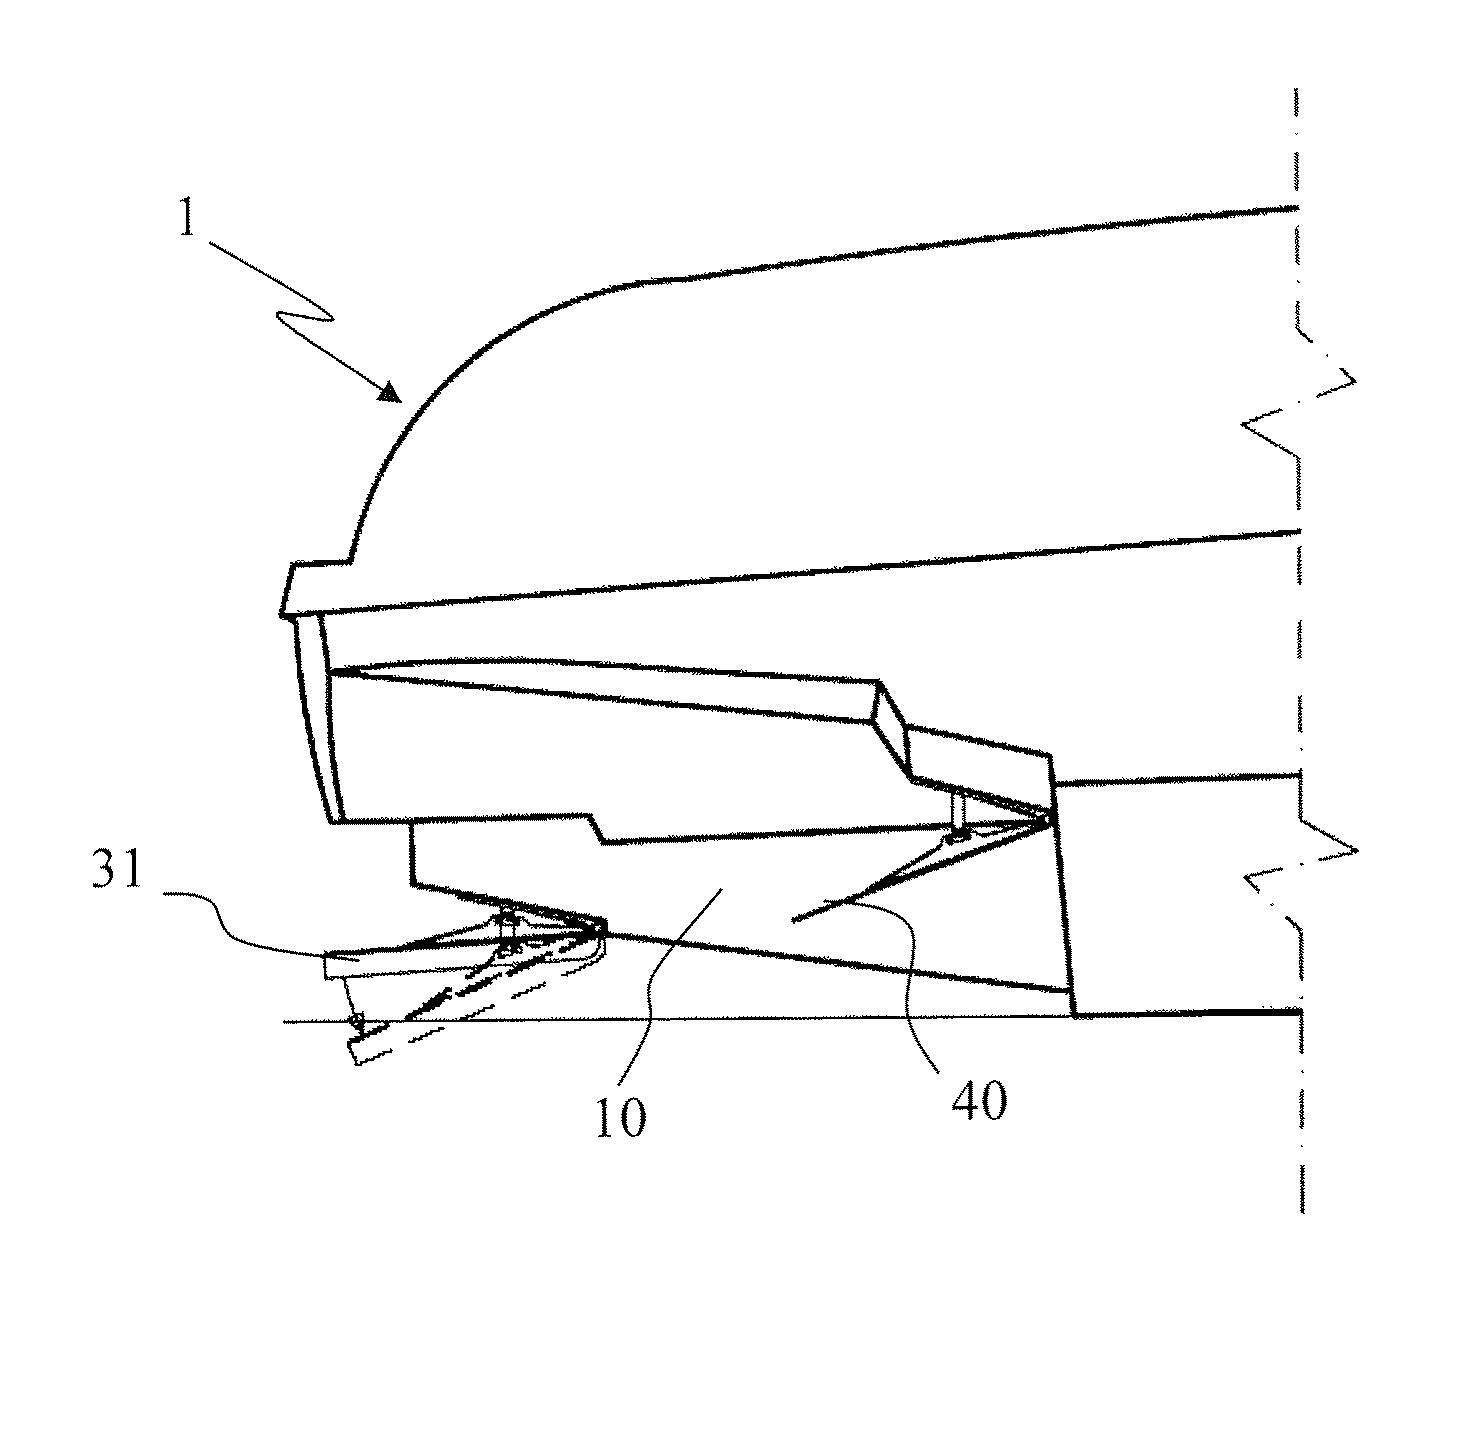 High performance planing hull provided with a trim tab system